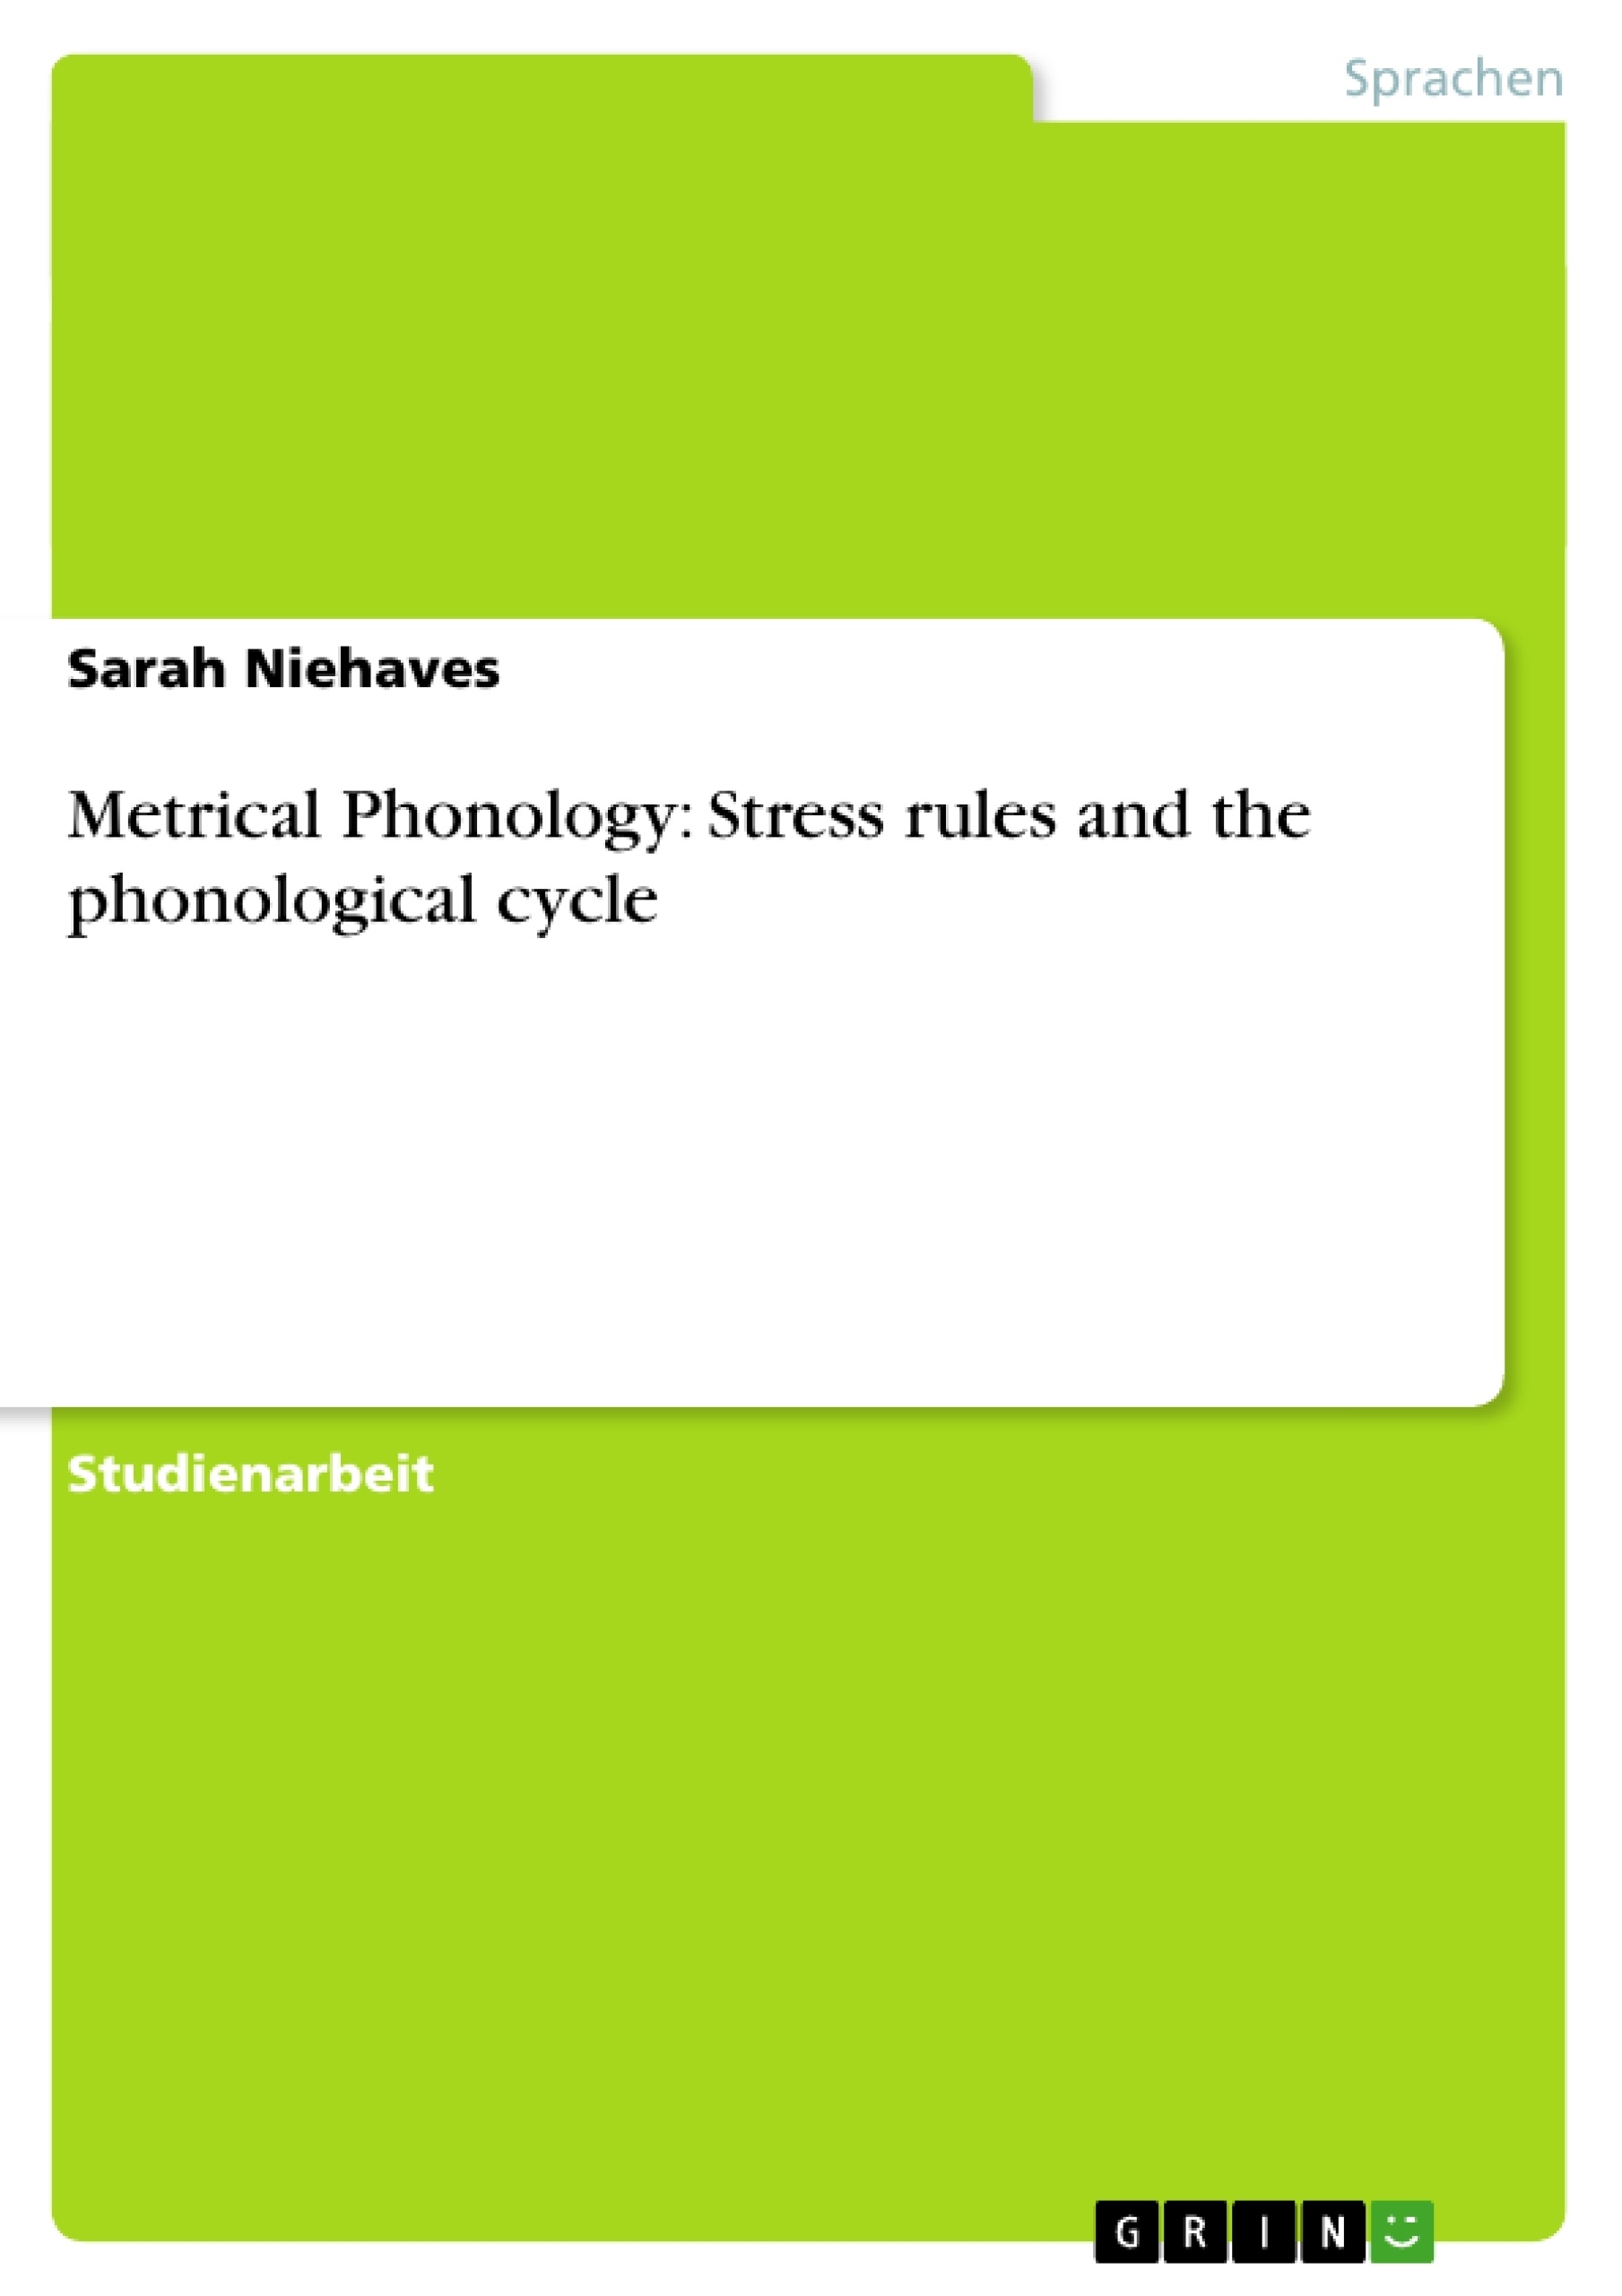 Título: Metrical Phonology: Stress rules and the phonological cycle